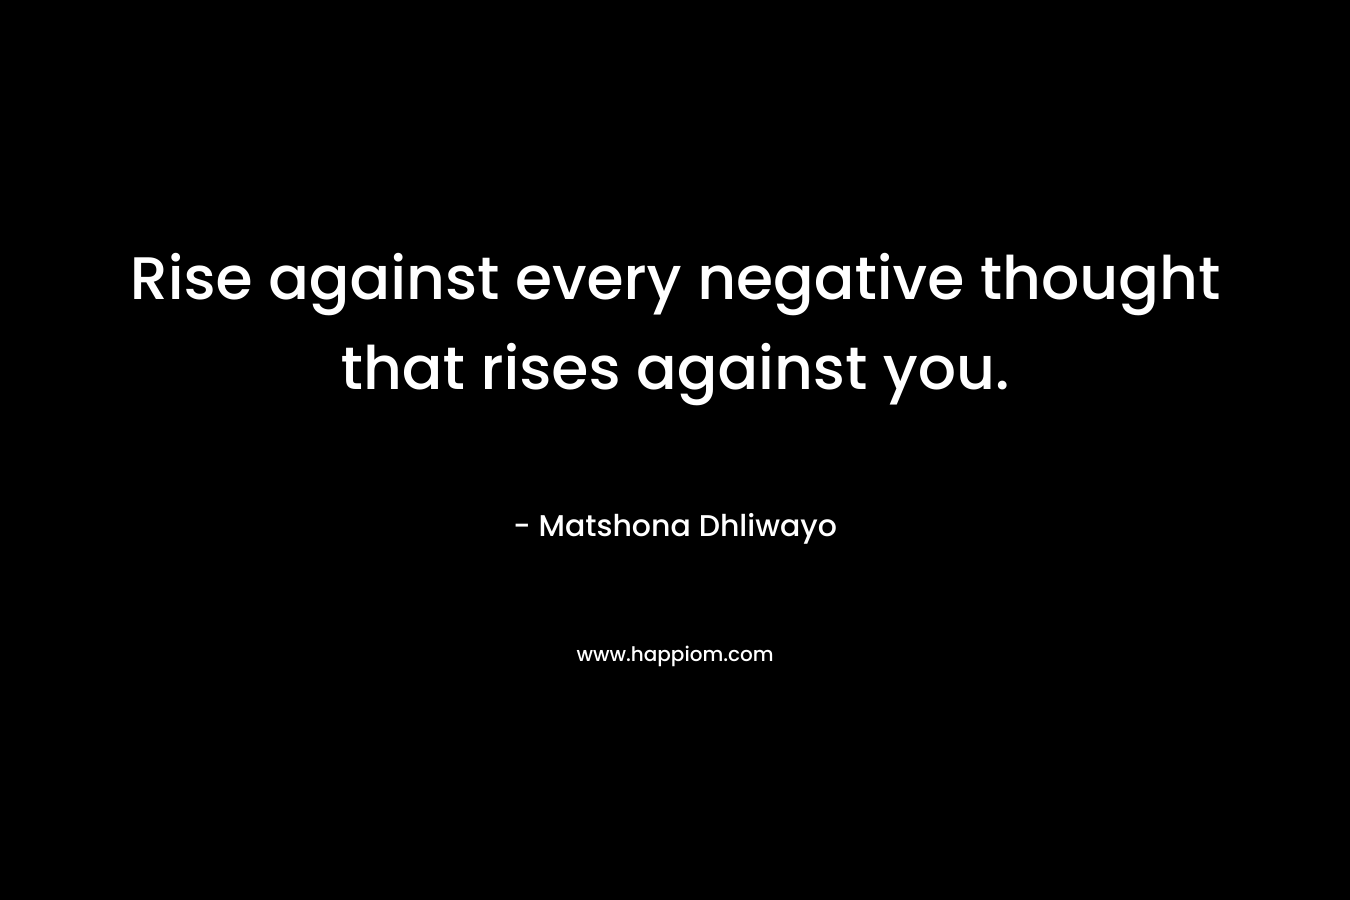 Rise against every negative thought that rises against you.